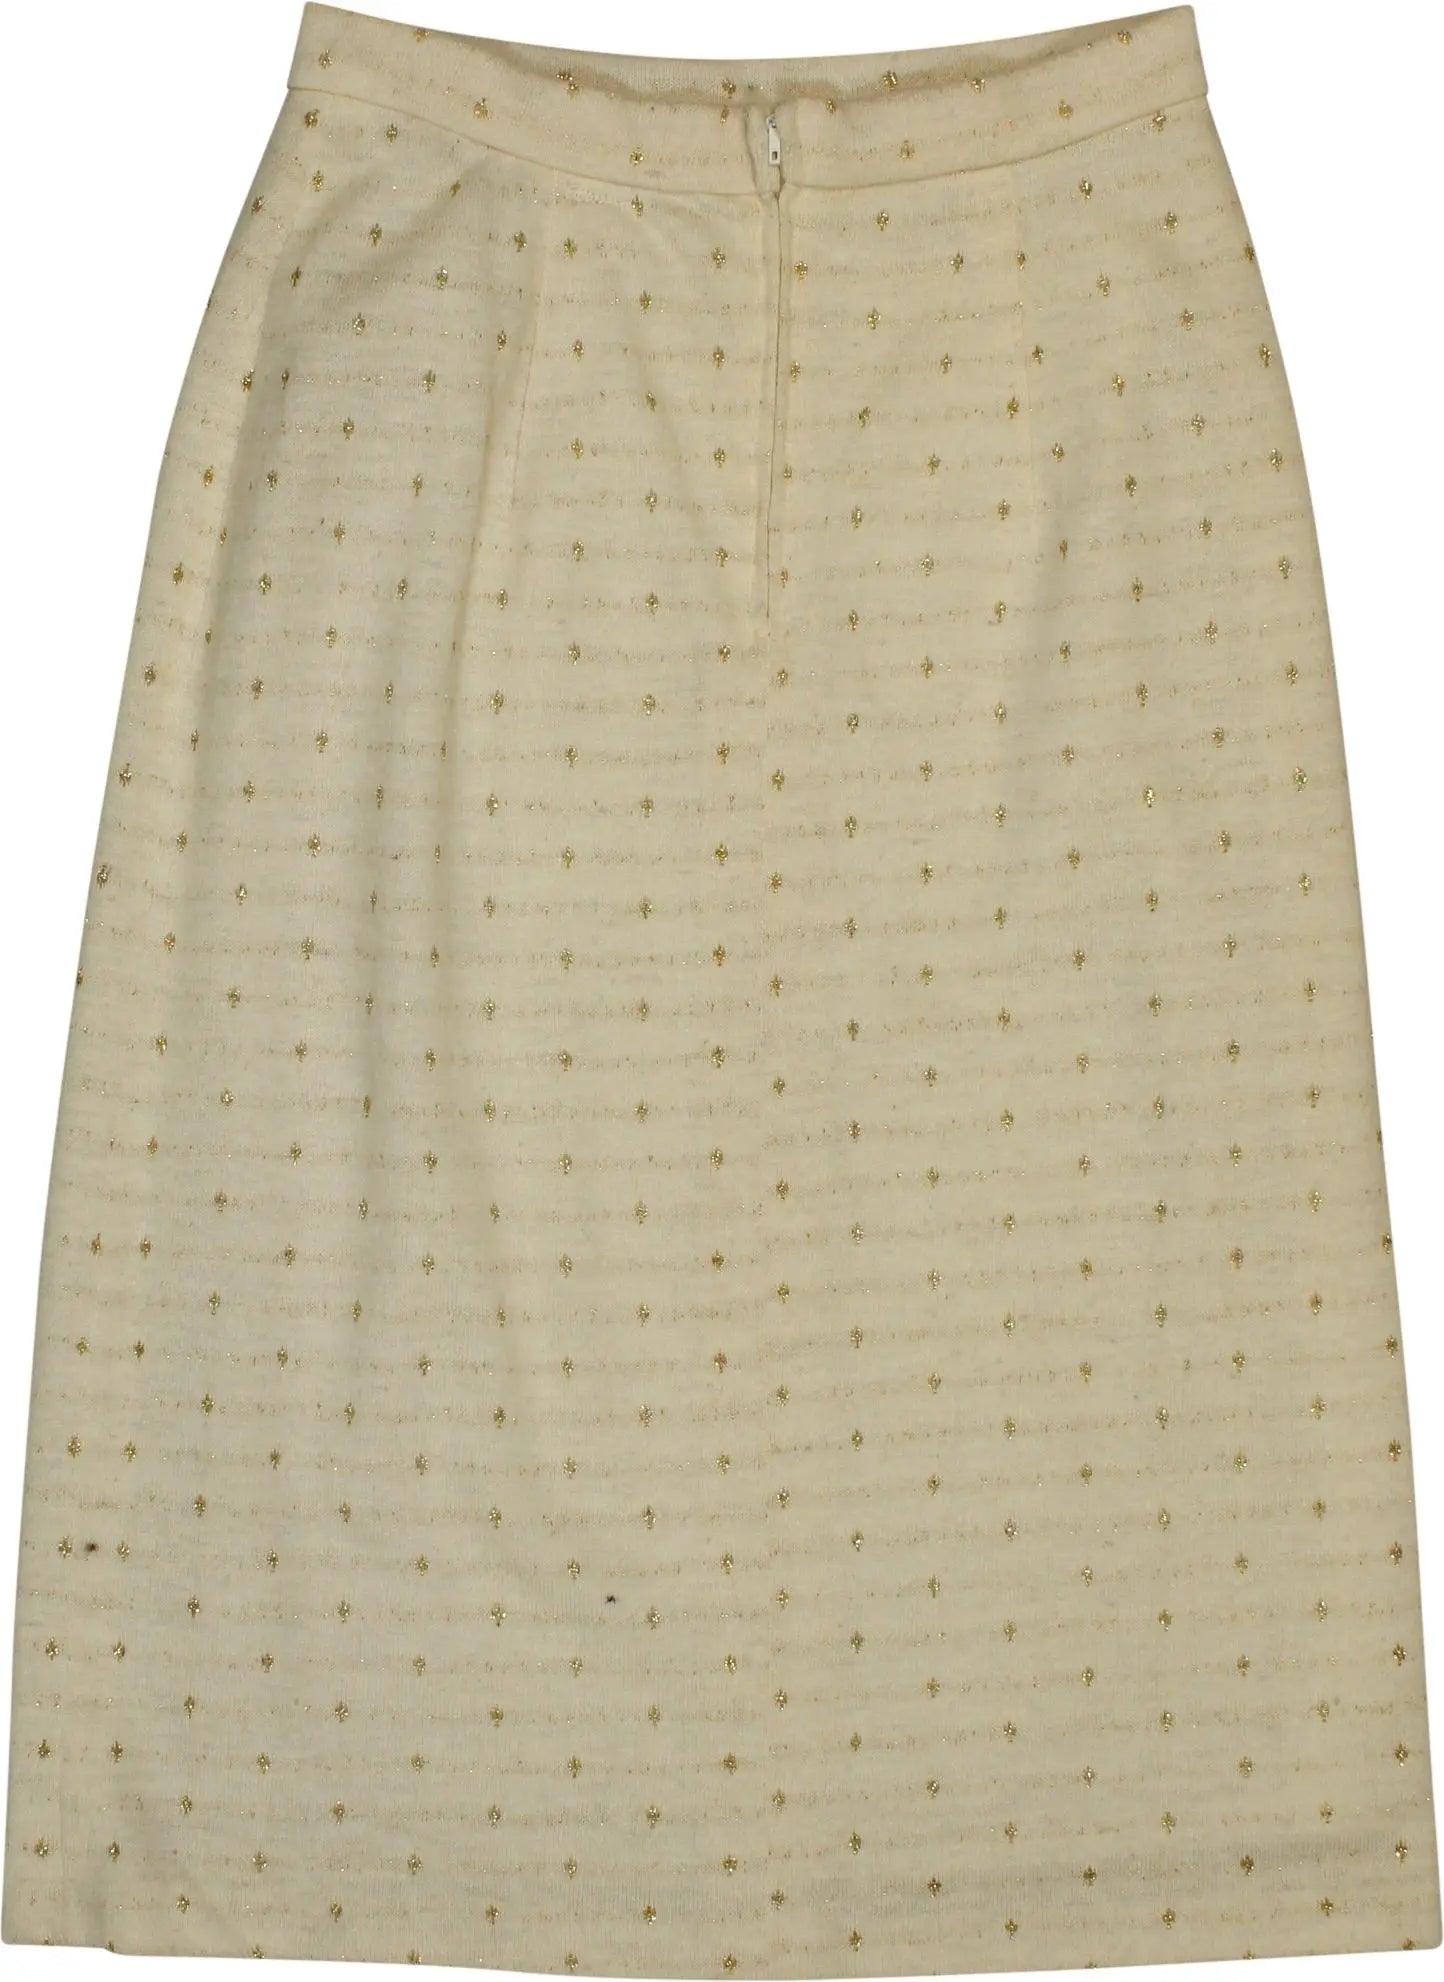 Handmade - Handmade Knitted Pencil Skirt- ThriftTale.com - Vintage and second handclothing